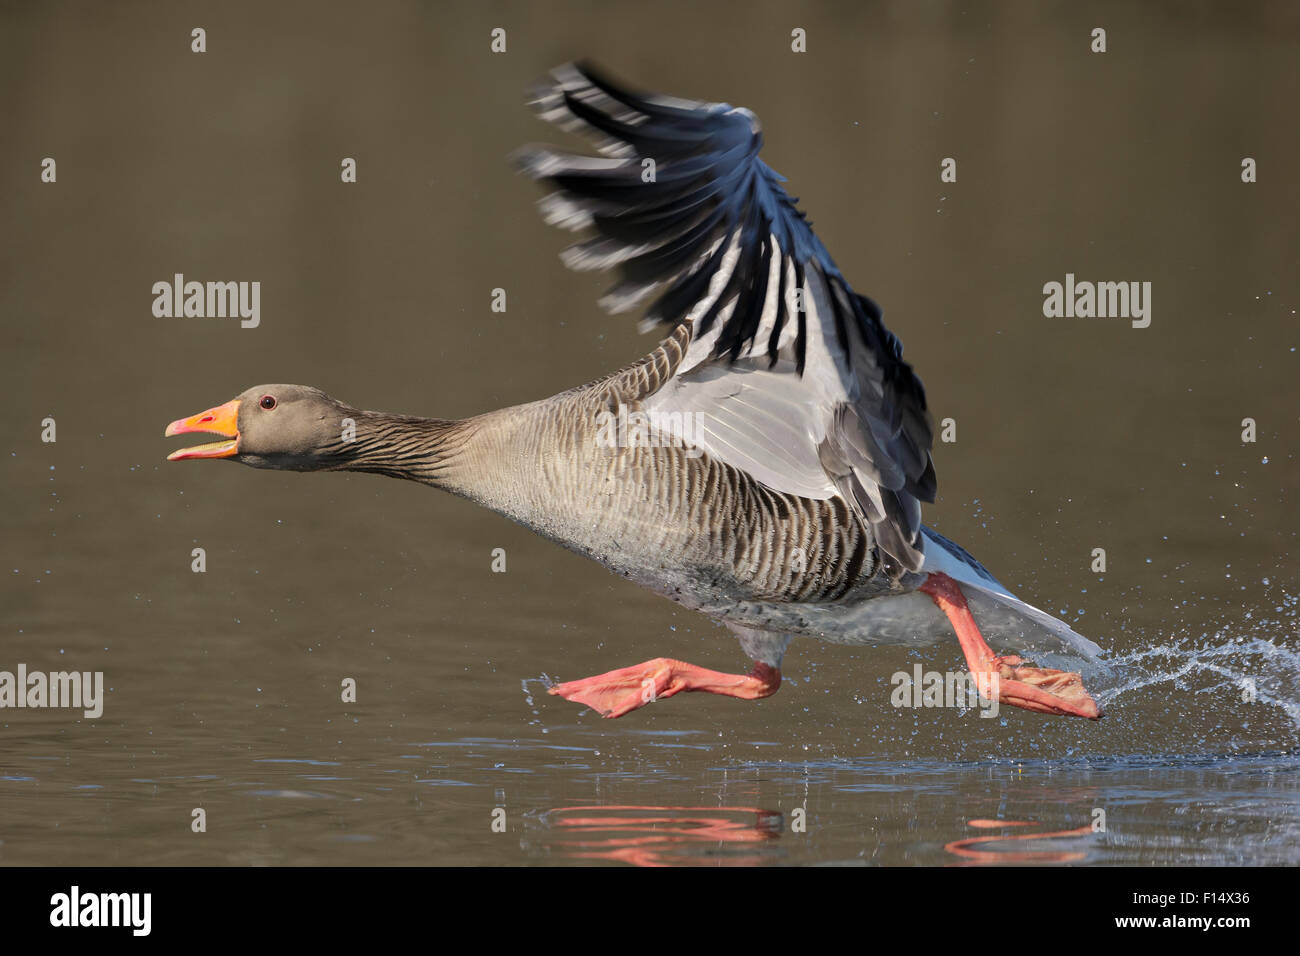 Greylag goose (Anser anser) taking flight from lake. Southern Norway. March. Stock Photo